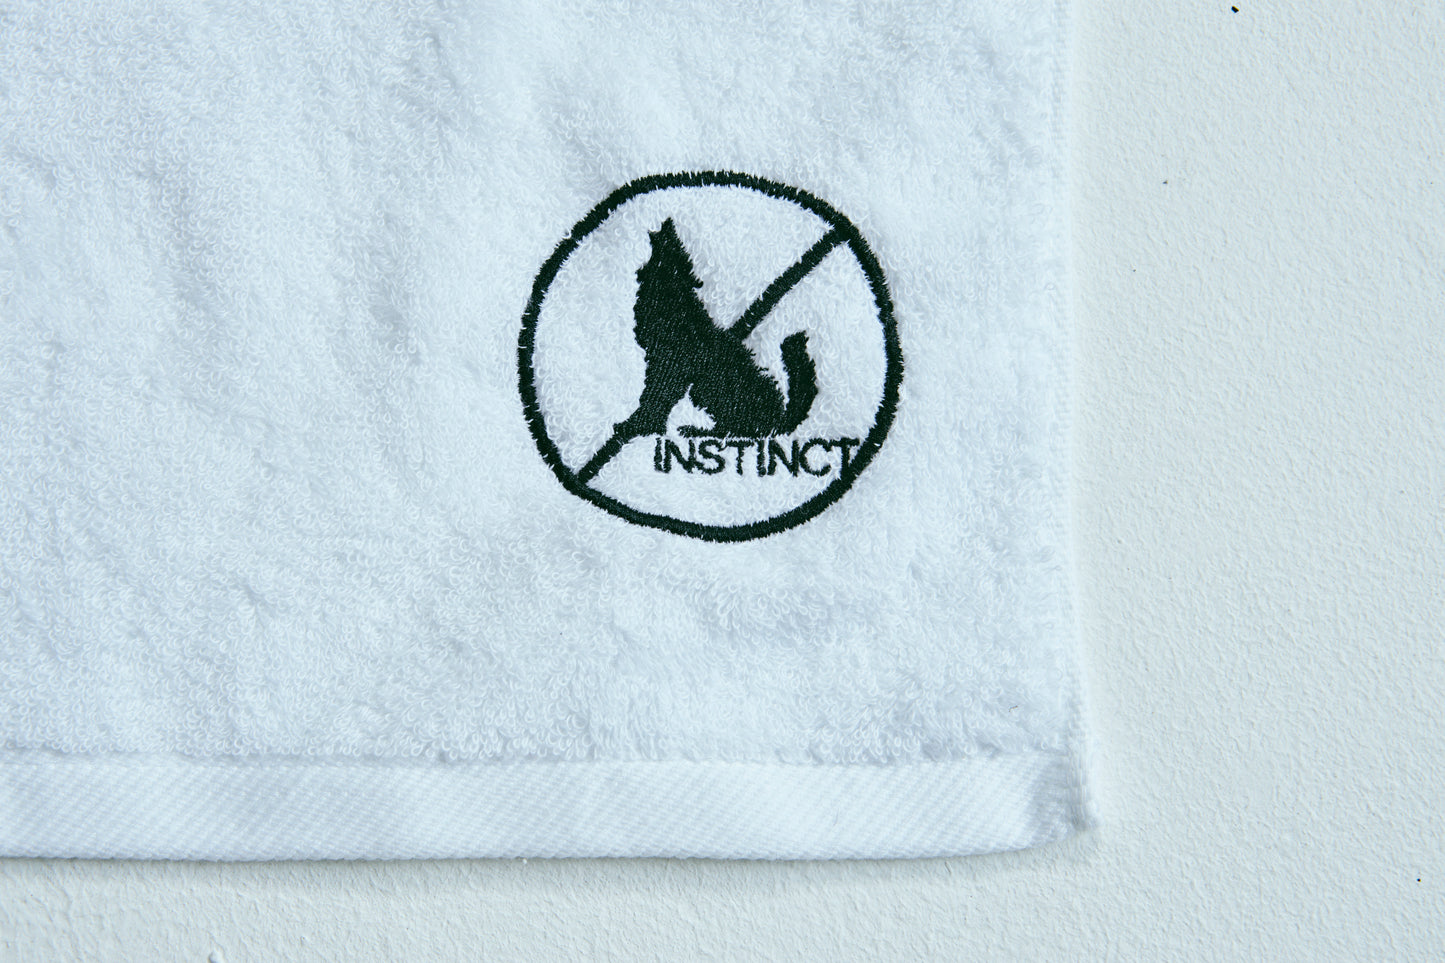 "Wolf" Face Towel